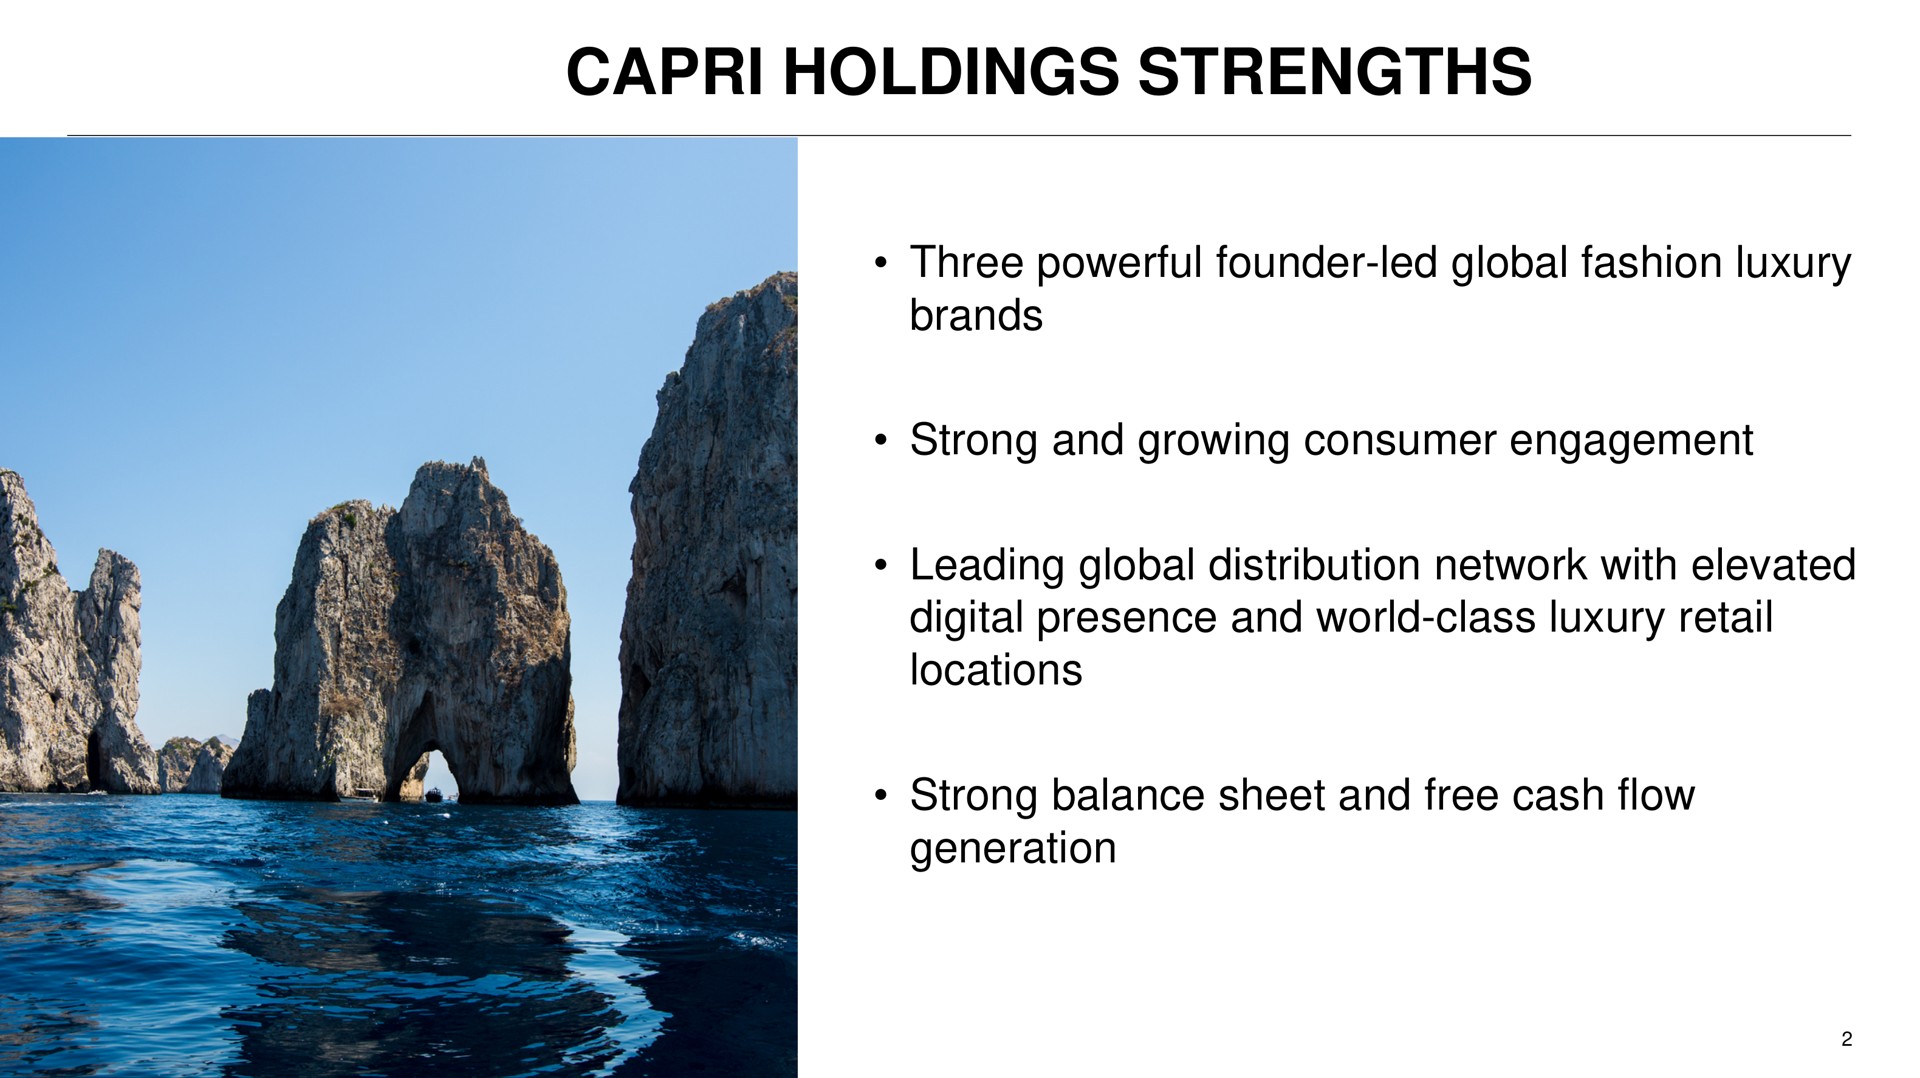 holdings strengths three powerful founder led global fashion luxury brands strong and growing consumer engagement leading global distribution network with elevated digital presence and world class luxury retail locations strong balance sheet and free cash flow generation | Capri Holdings